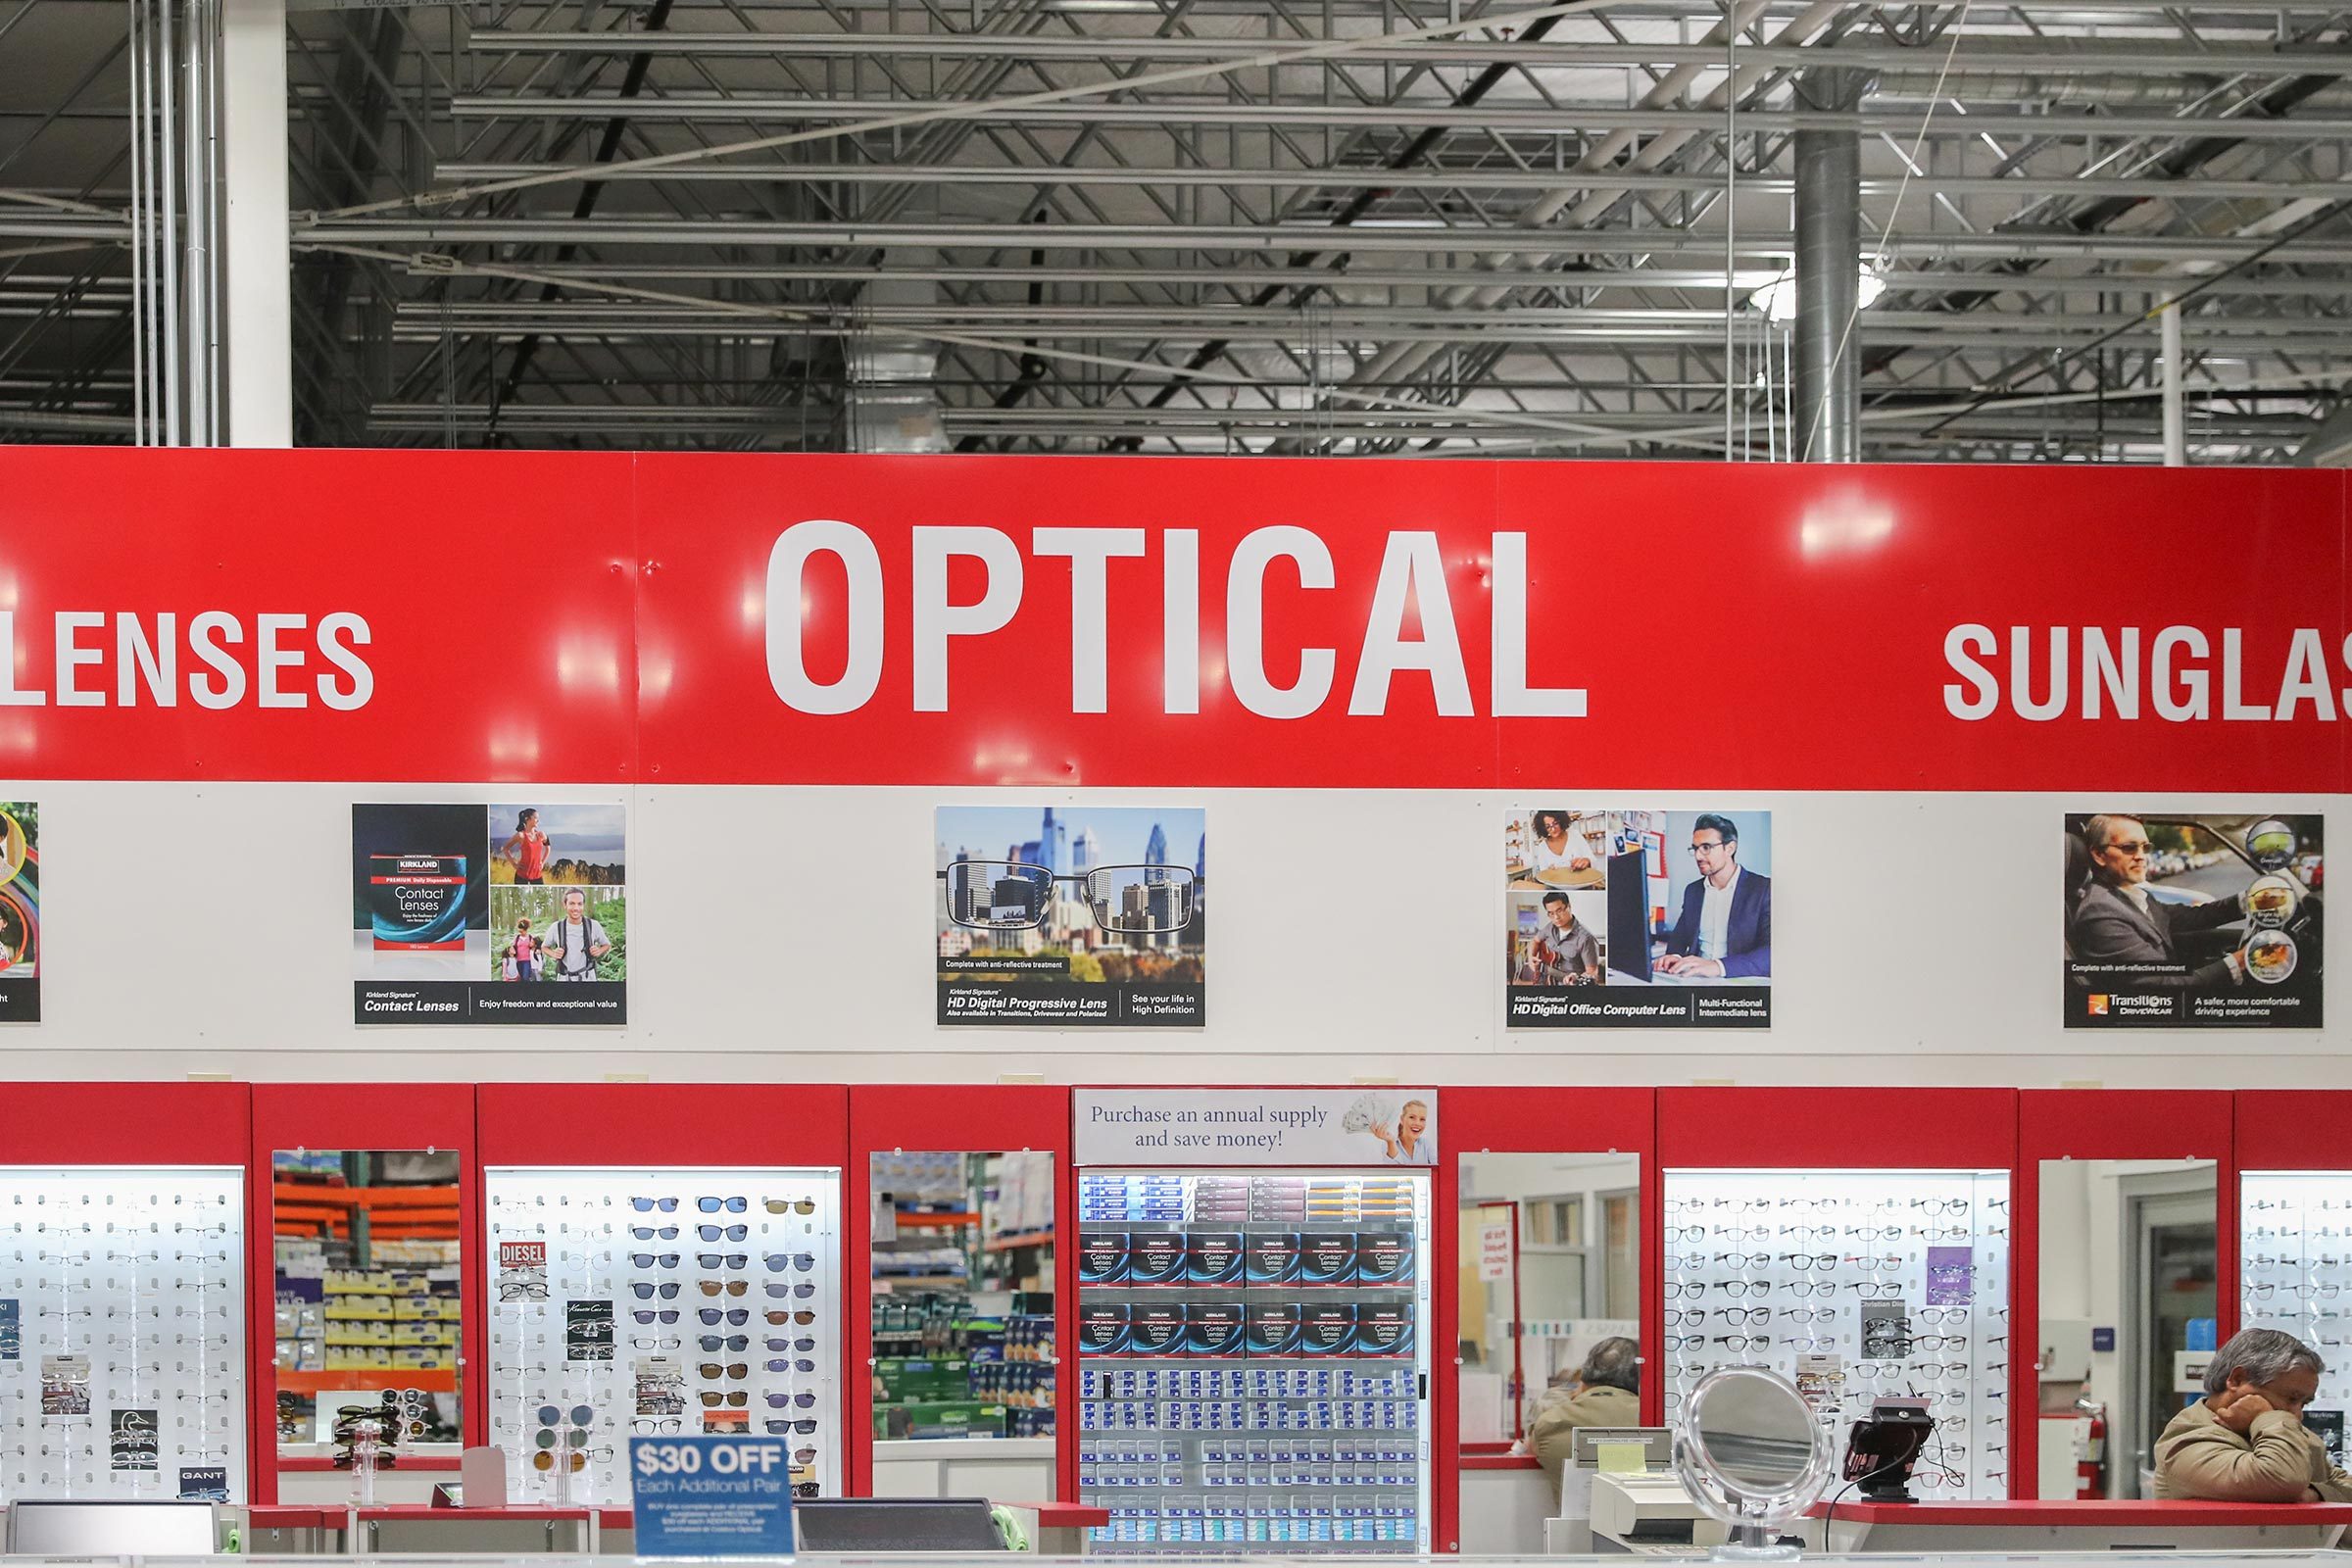 Why You Should Be Getting Your Eyeglasses at Costco | Reader's Digest